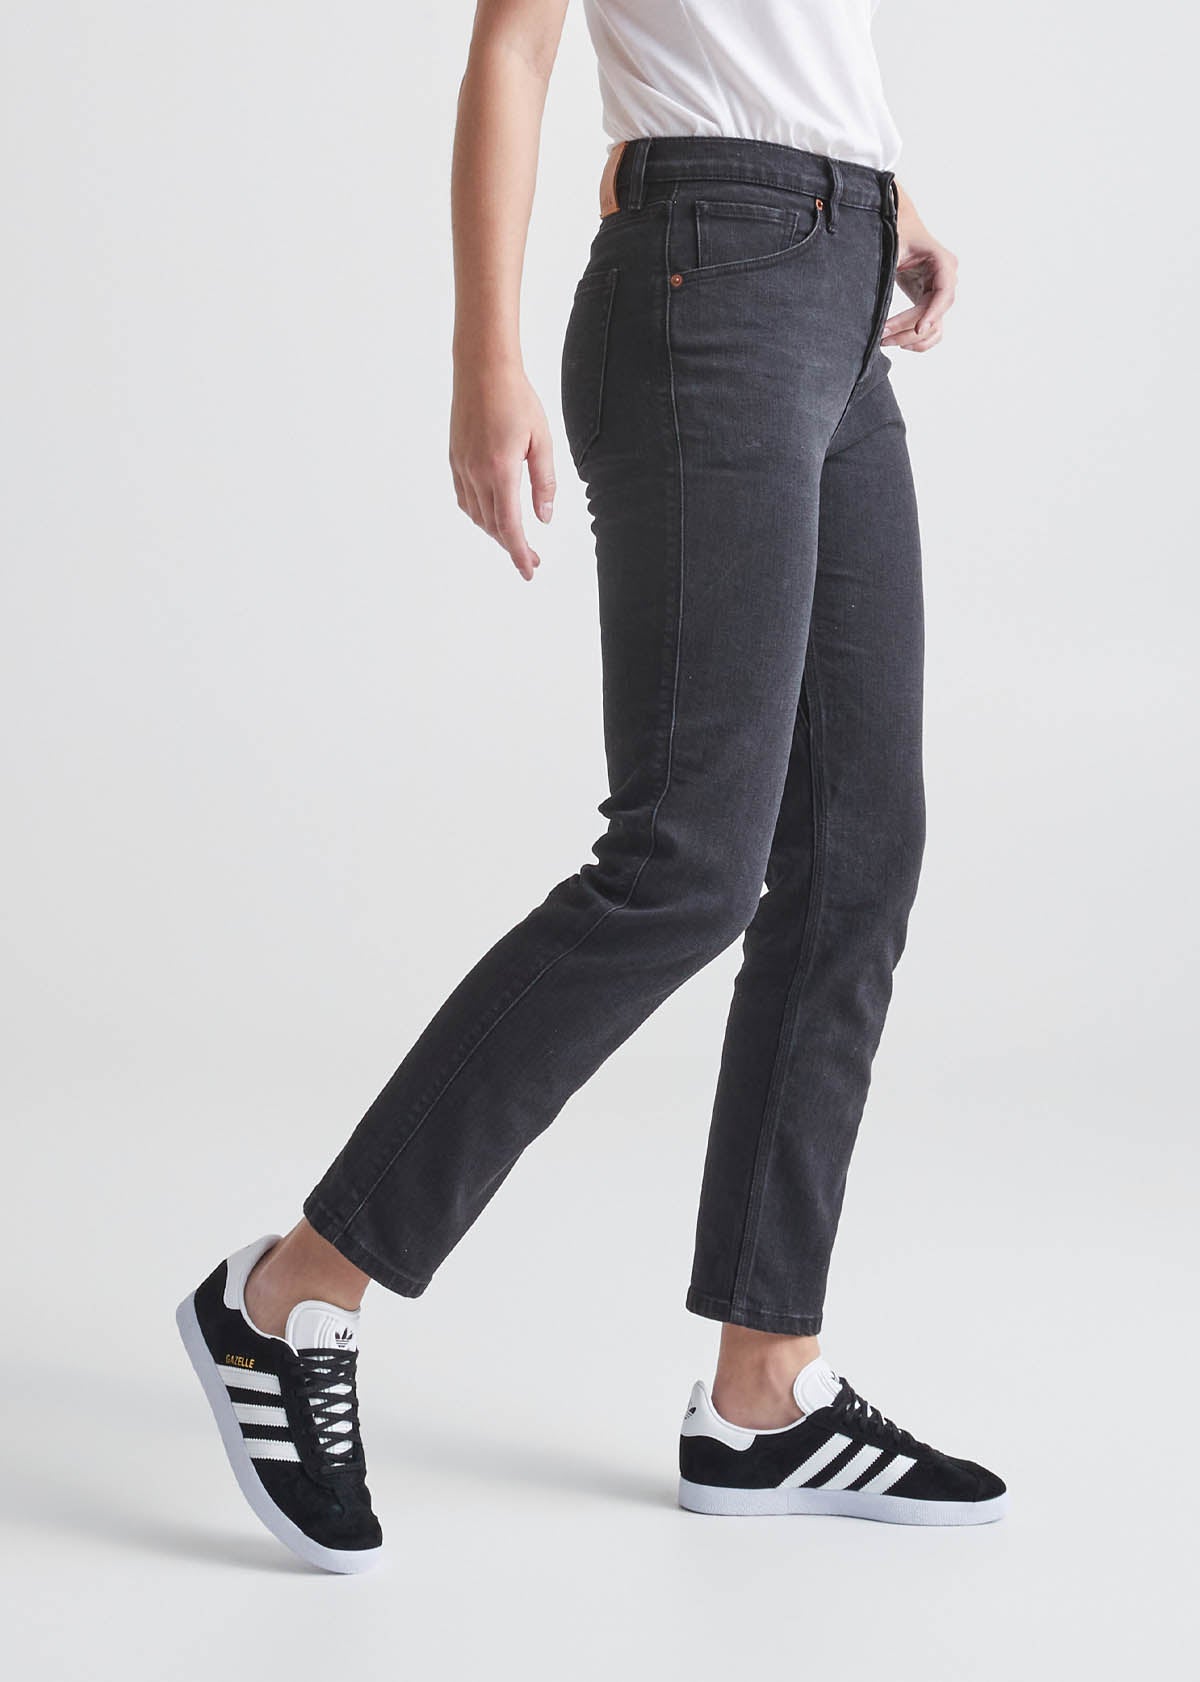 Women's Vintage Black High Rise Straight Stretch Jeans Side